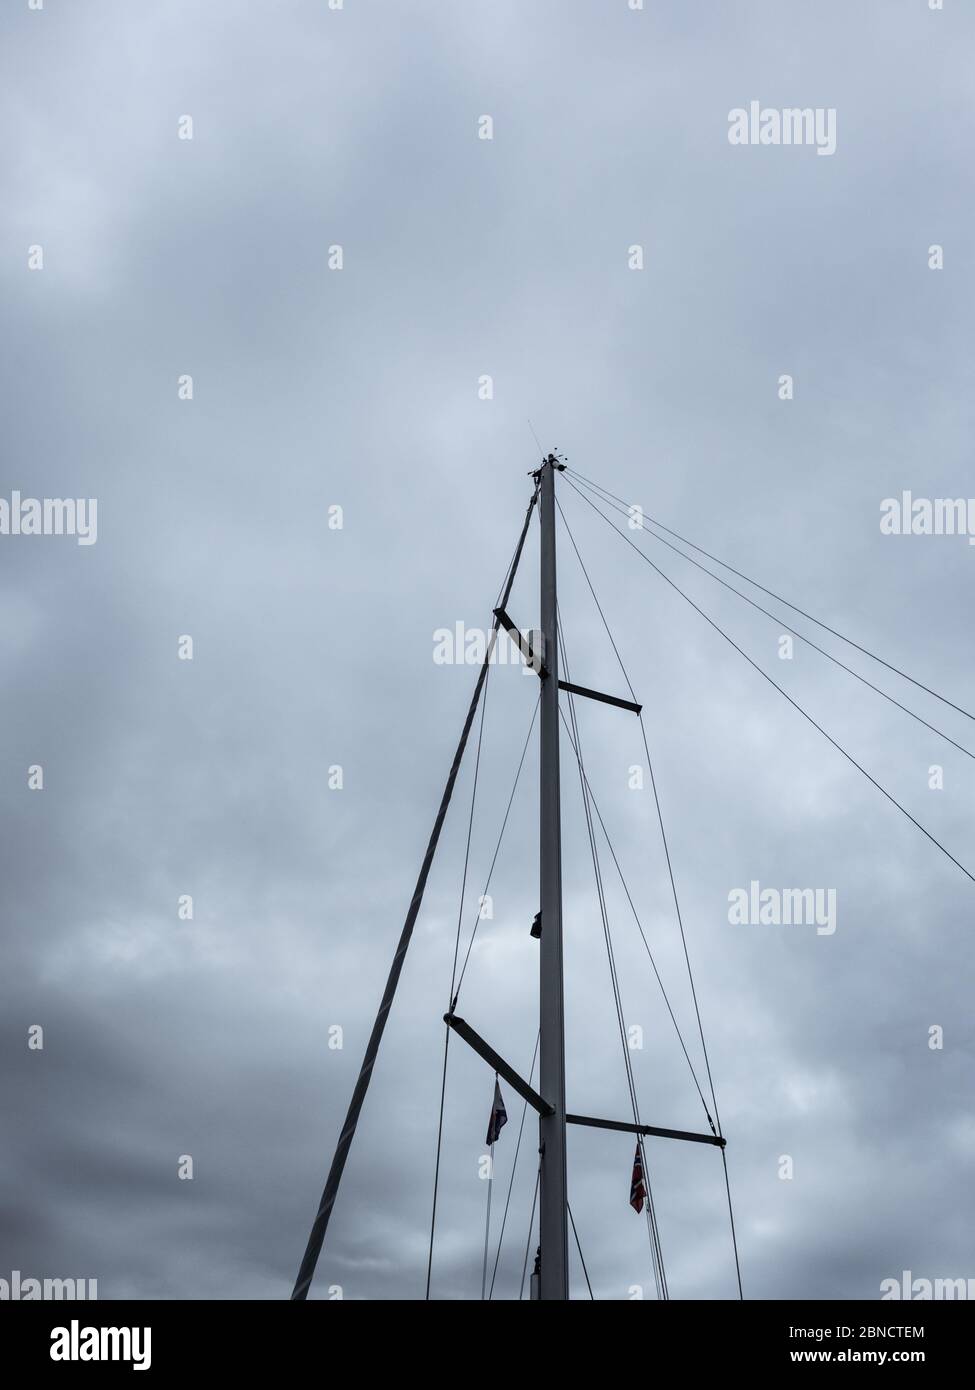 Sailing ship mast on heavy dark grey cloudy stormy sky background. Vertical close-up view Stock Photo